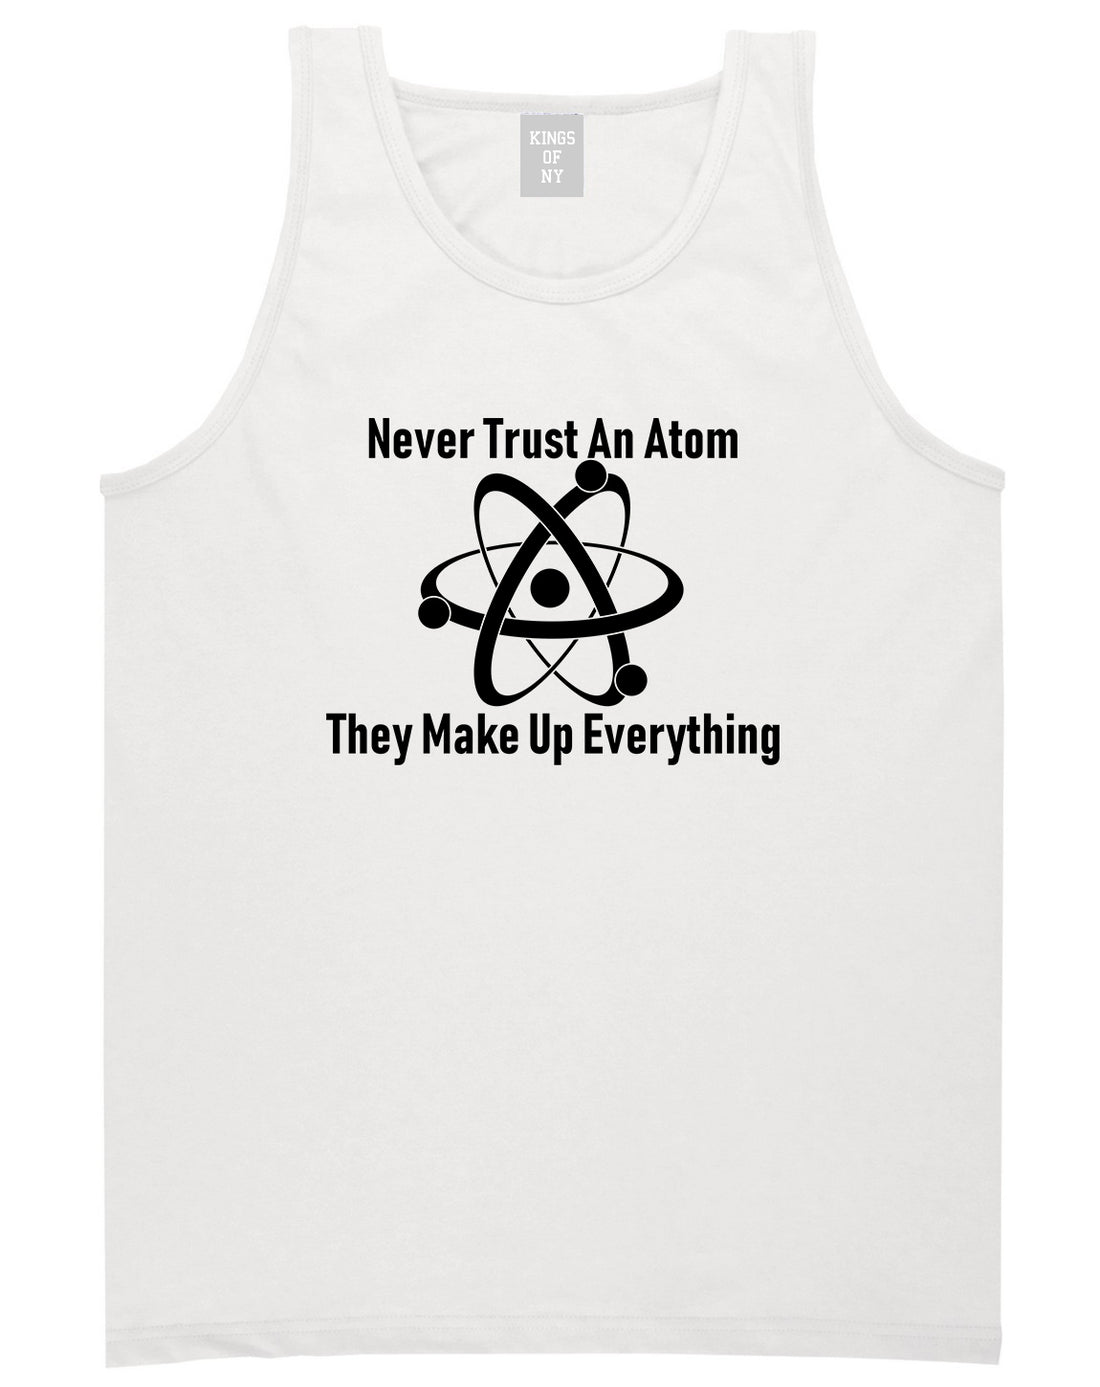 Never Trust An Atom They Make Up Everything Funny Mens Tank Top T-Shirt White